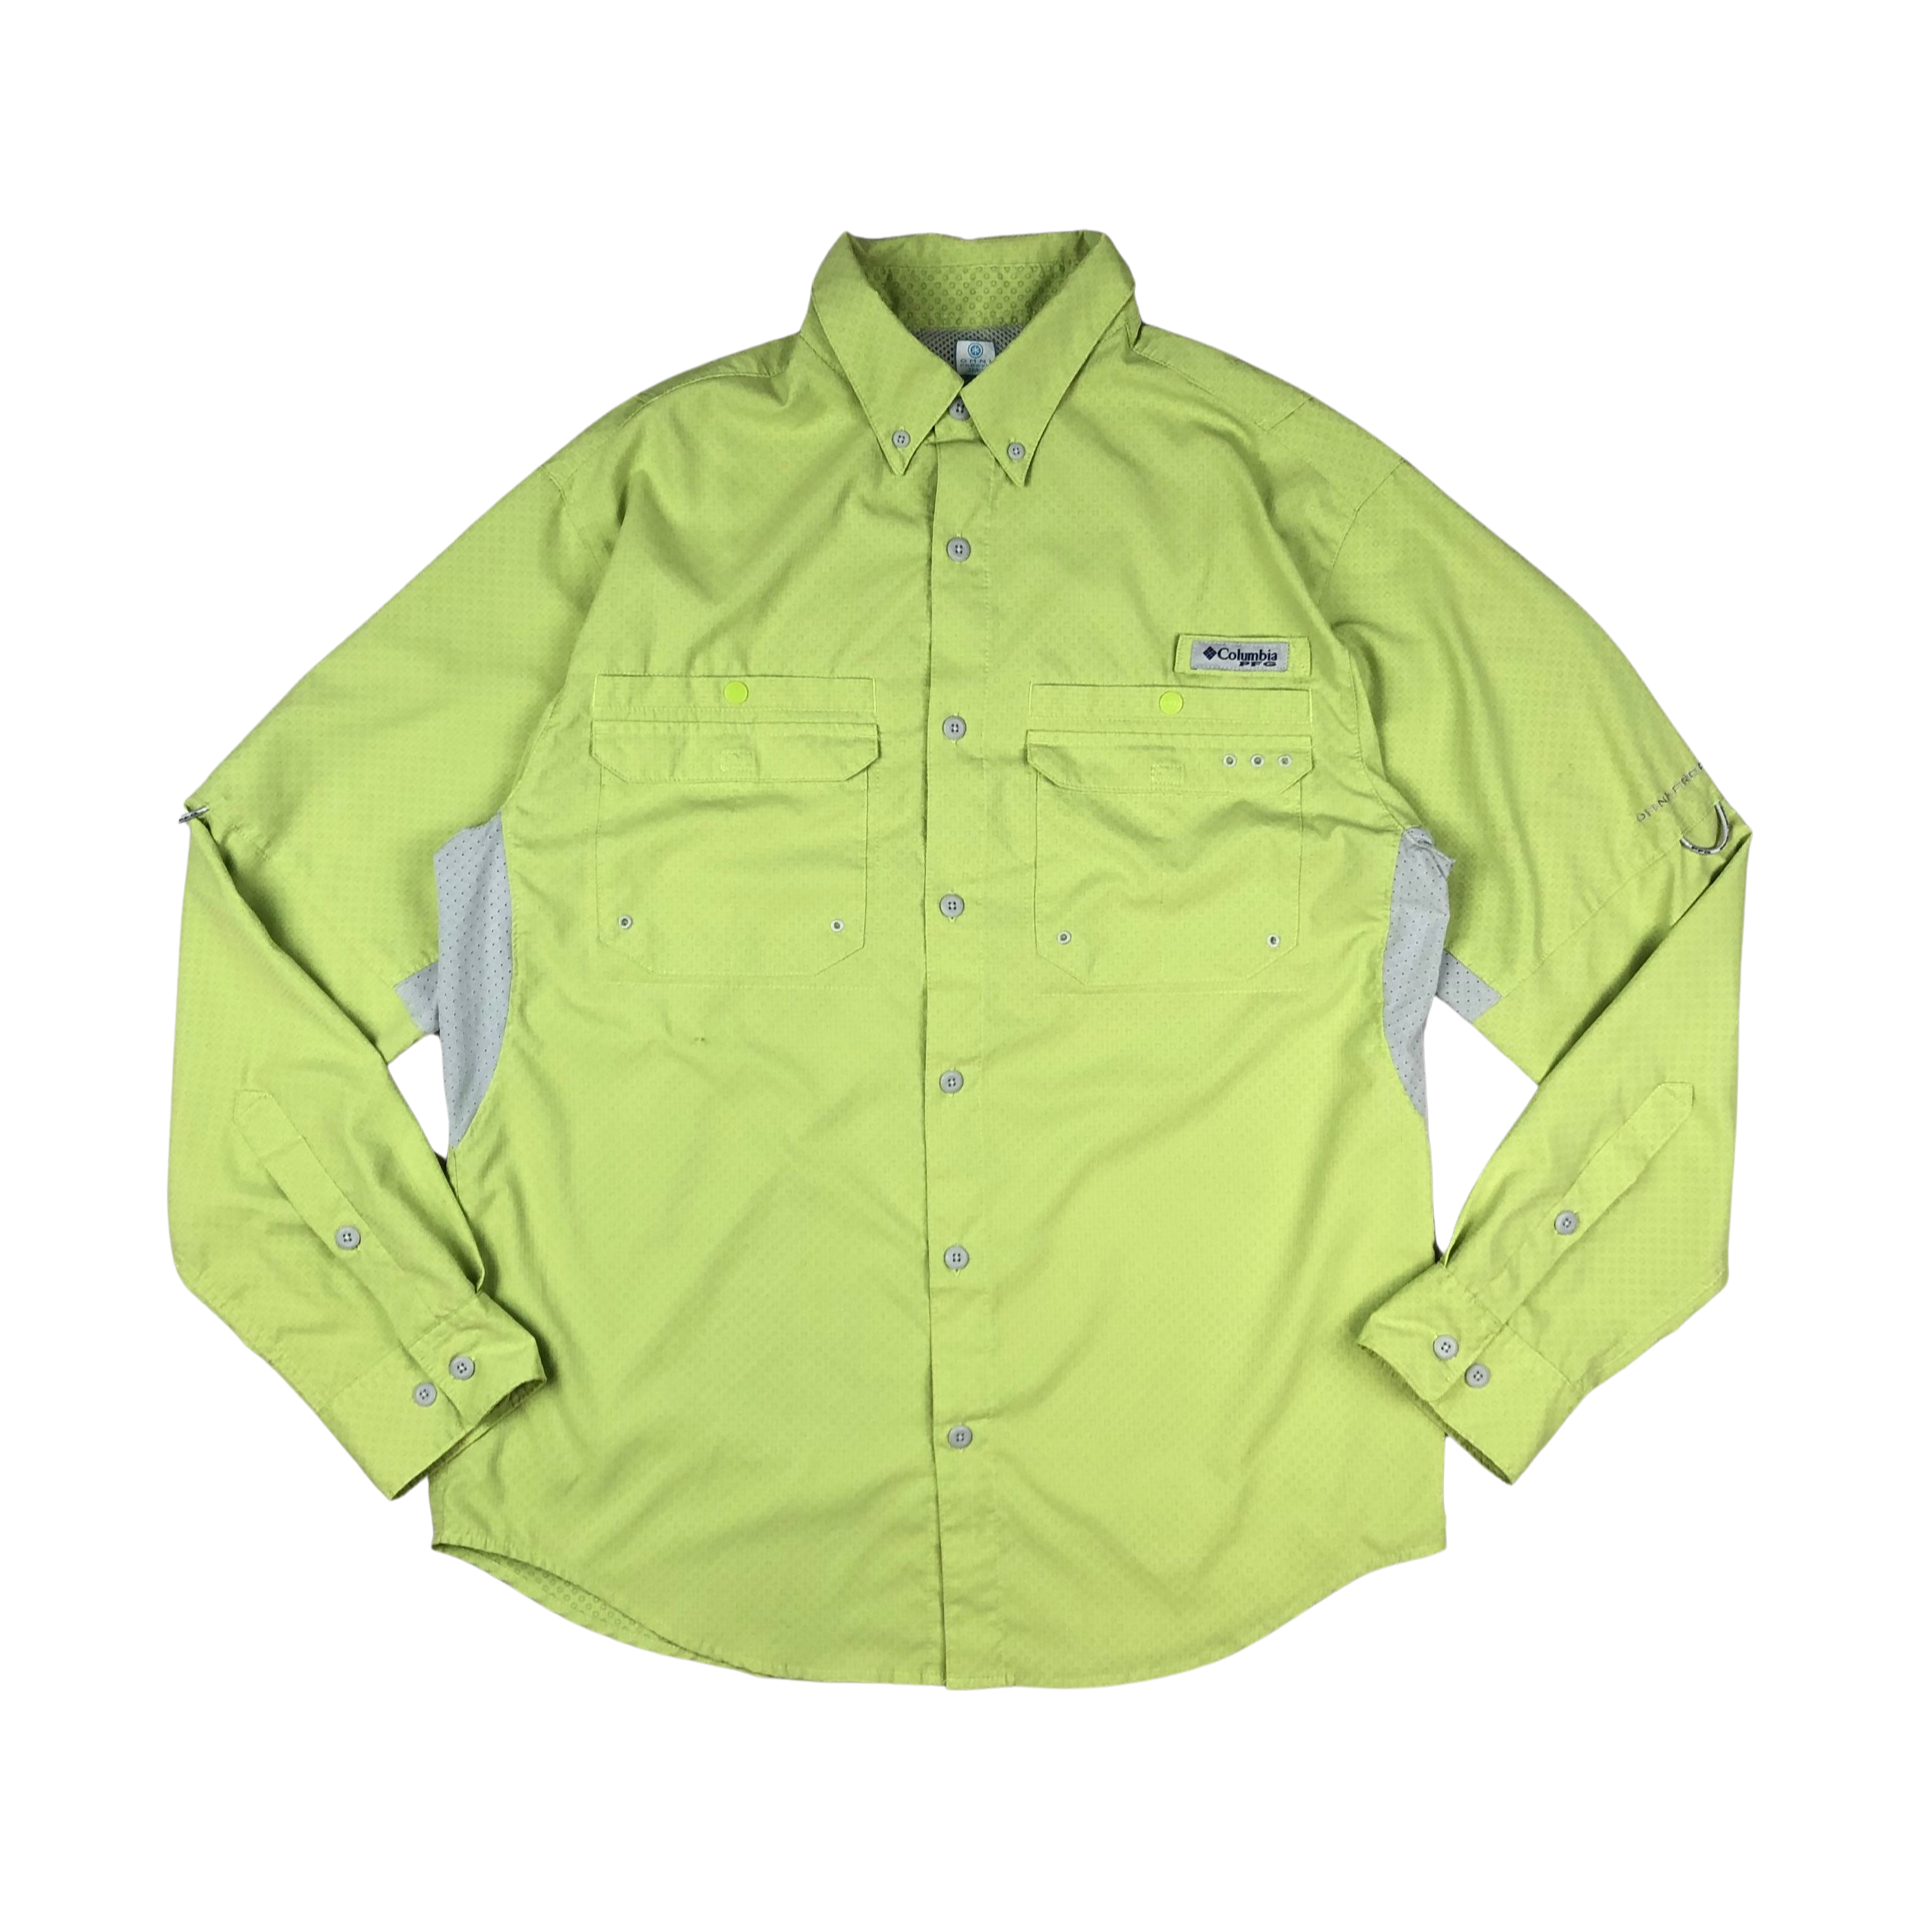 Preloved Columbia Technical Lime Green Shirt – Worth The Weight